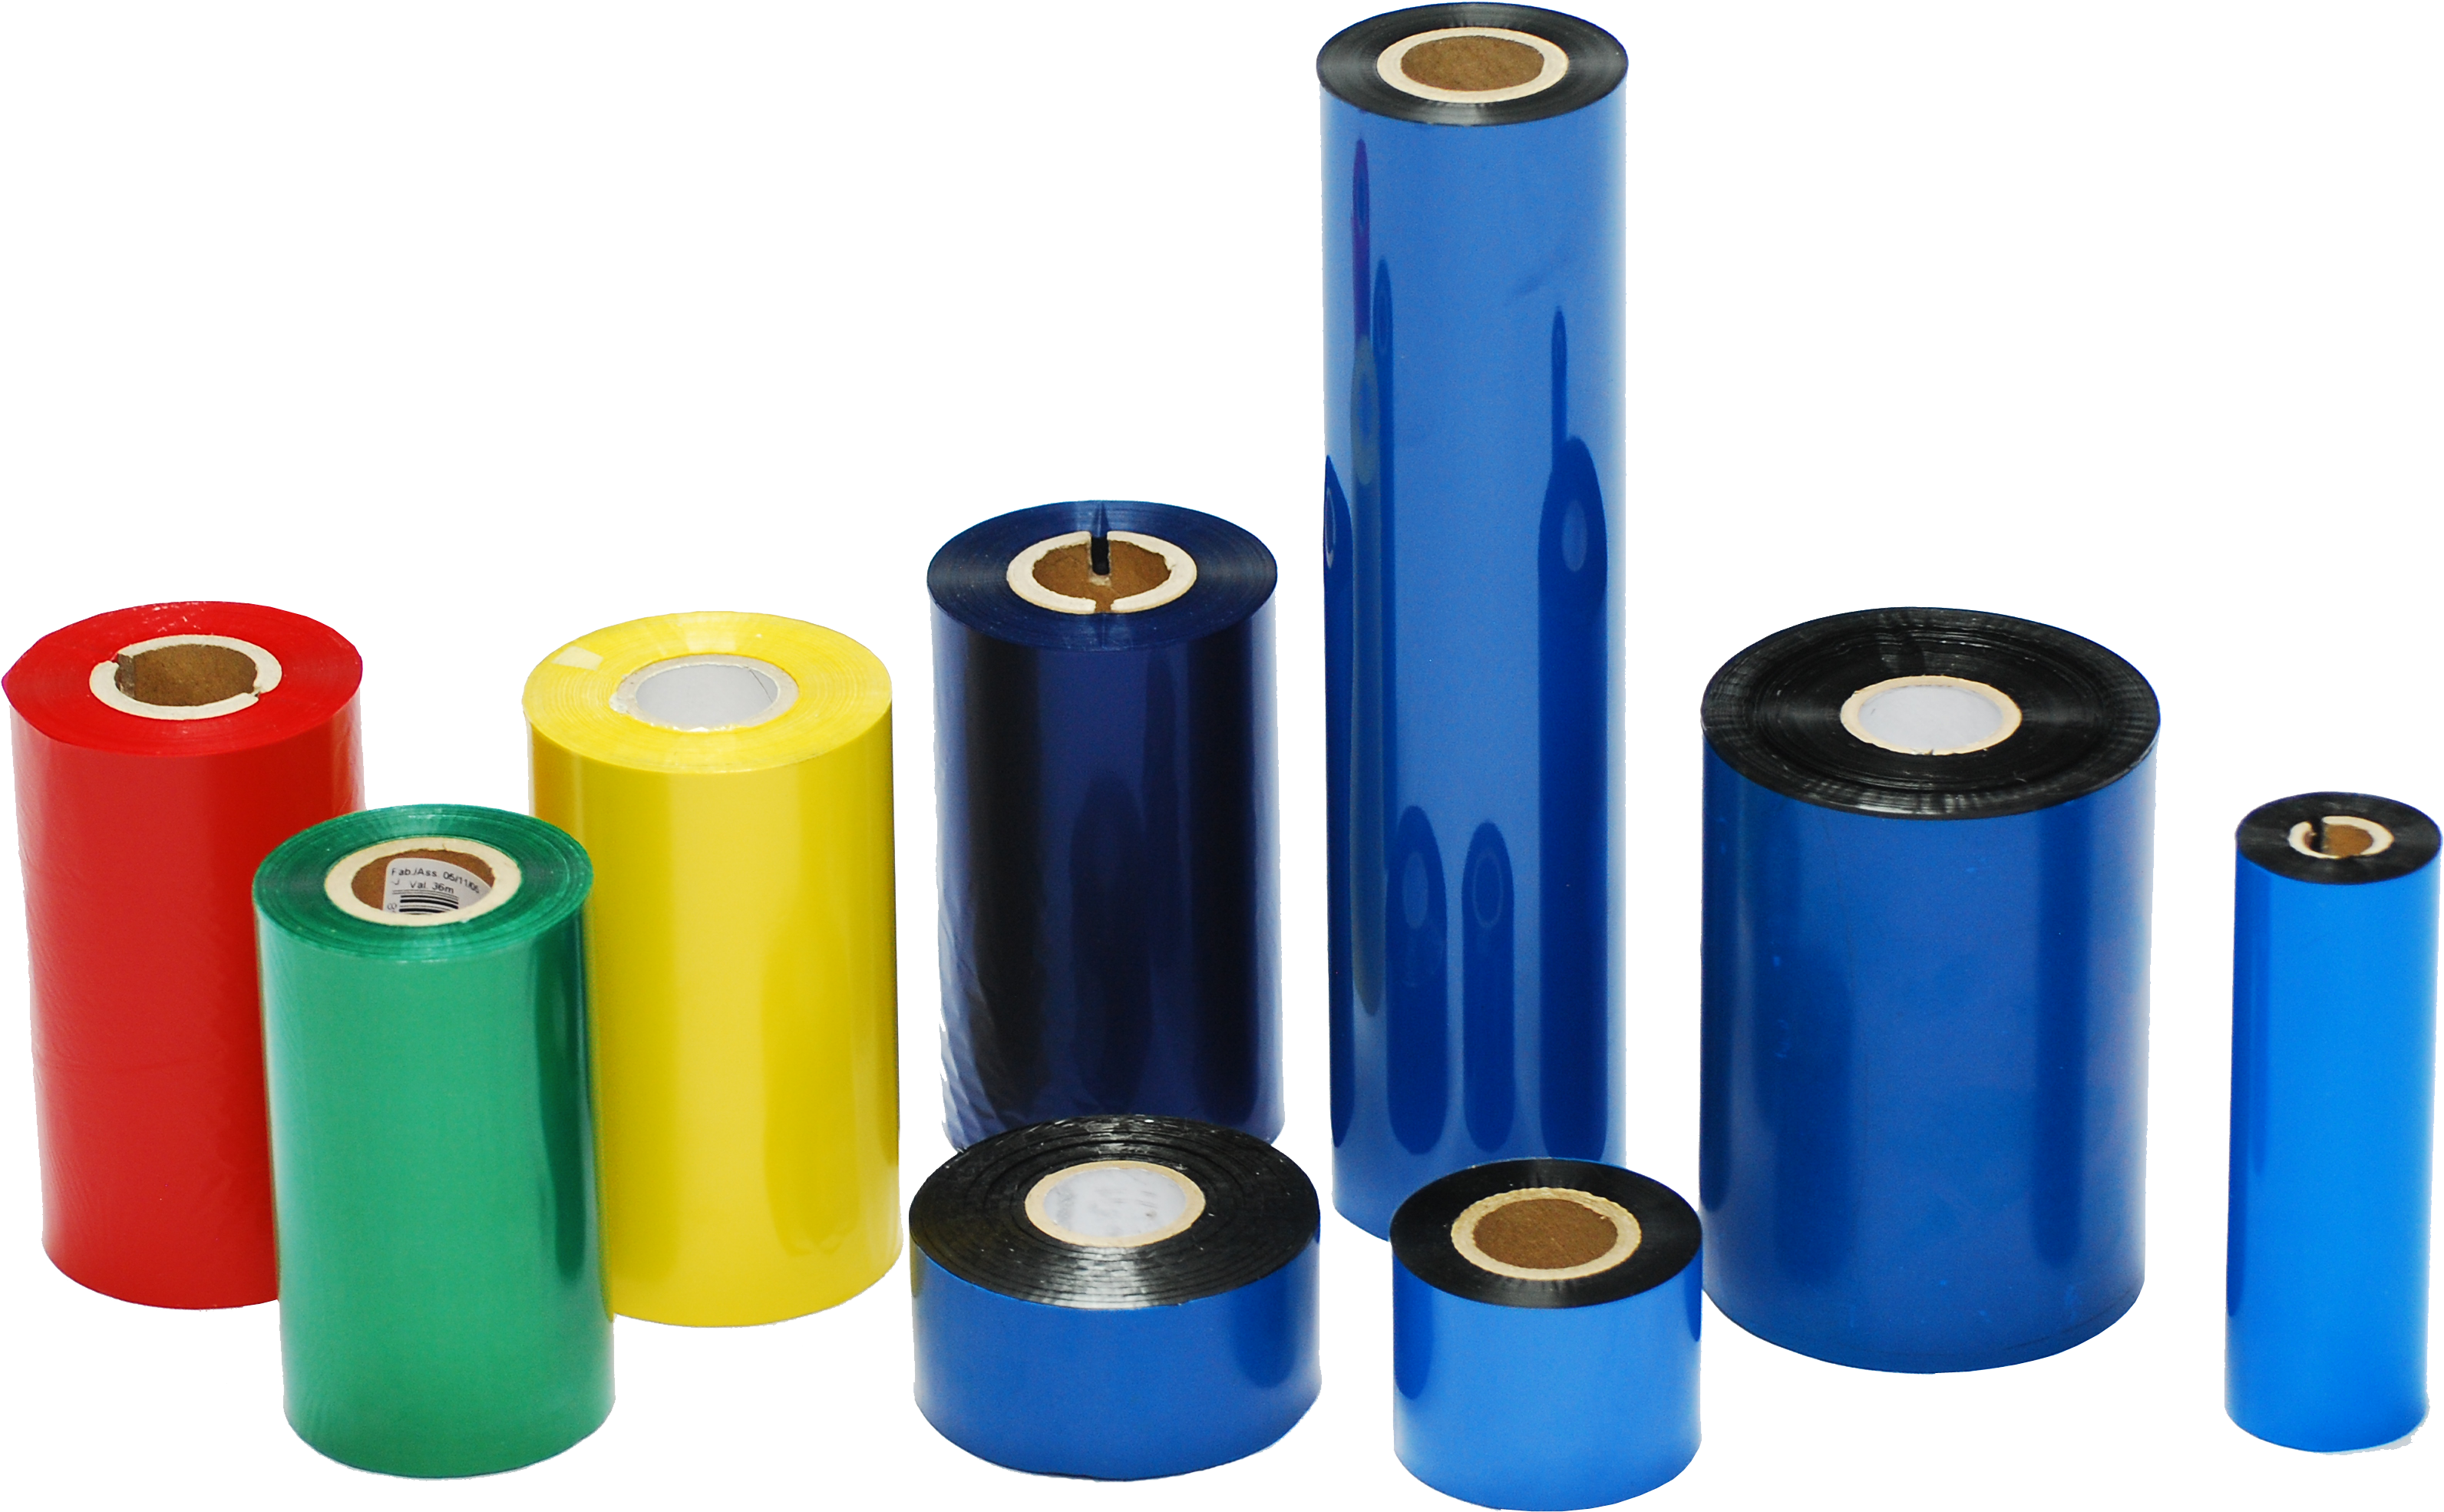 A Group Of Rolls Of Plastic